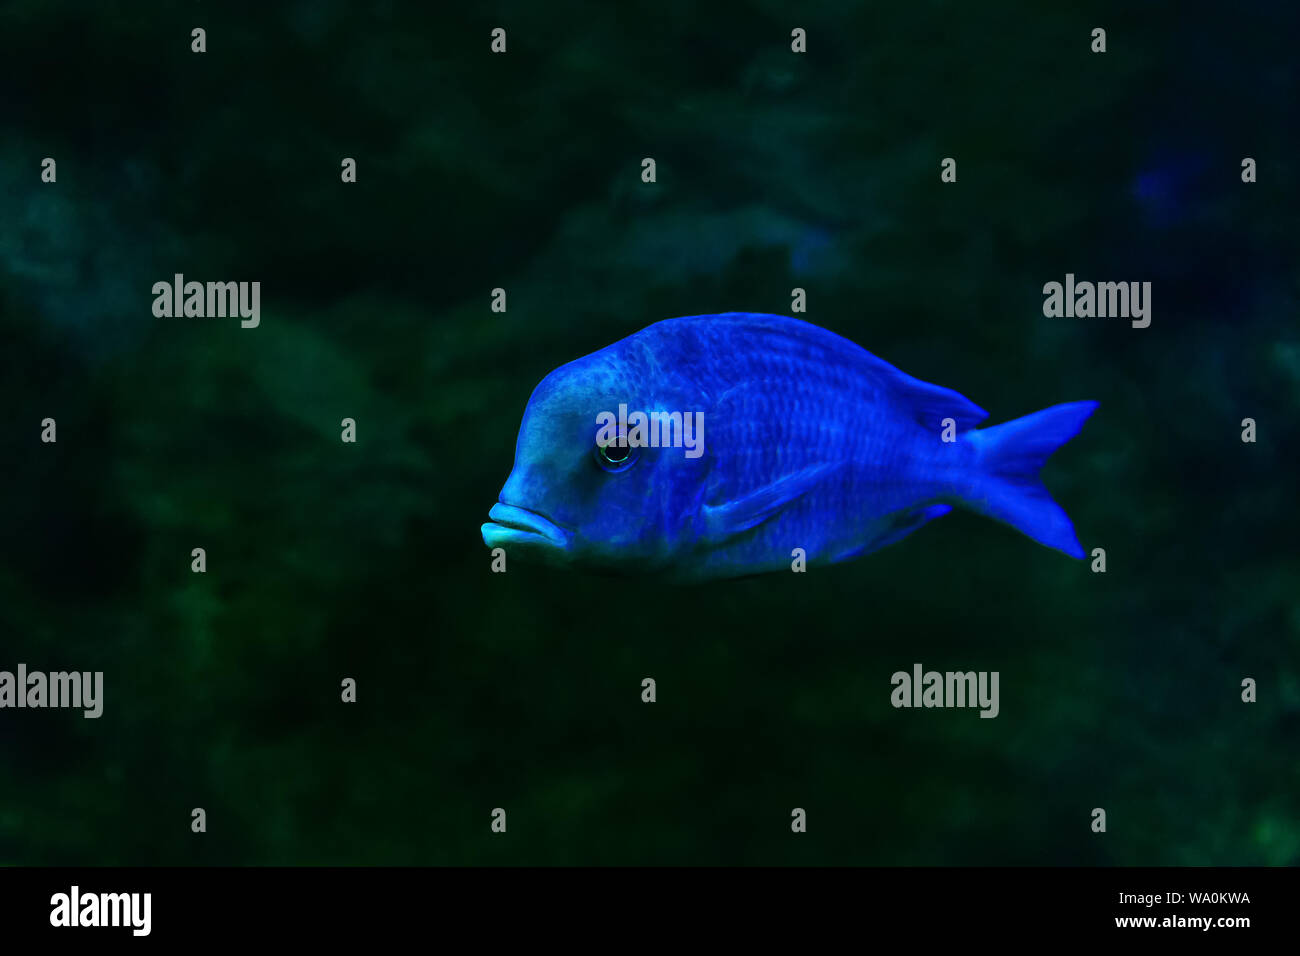 live blue fish Cyrtocara moorii (hump-head) swims in the water on a dark background Stock Photo